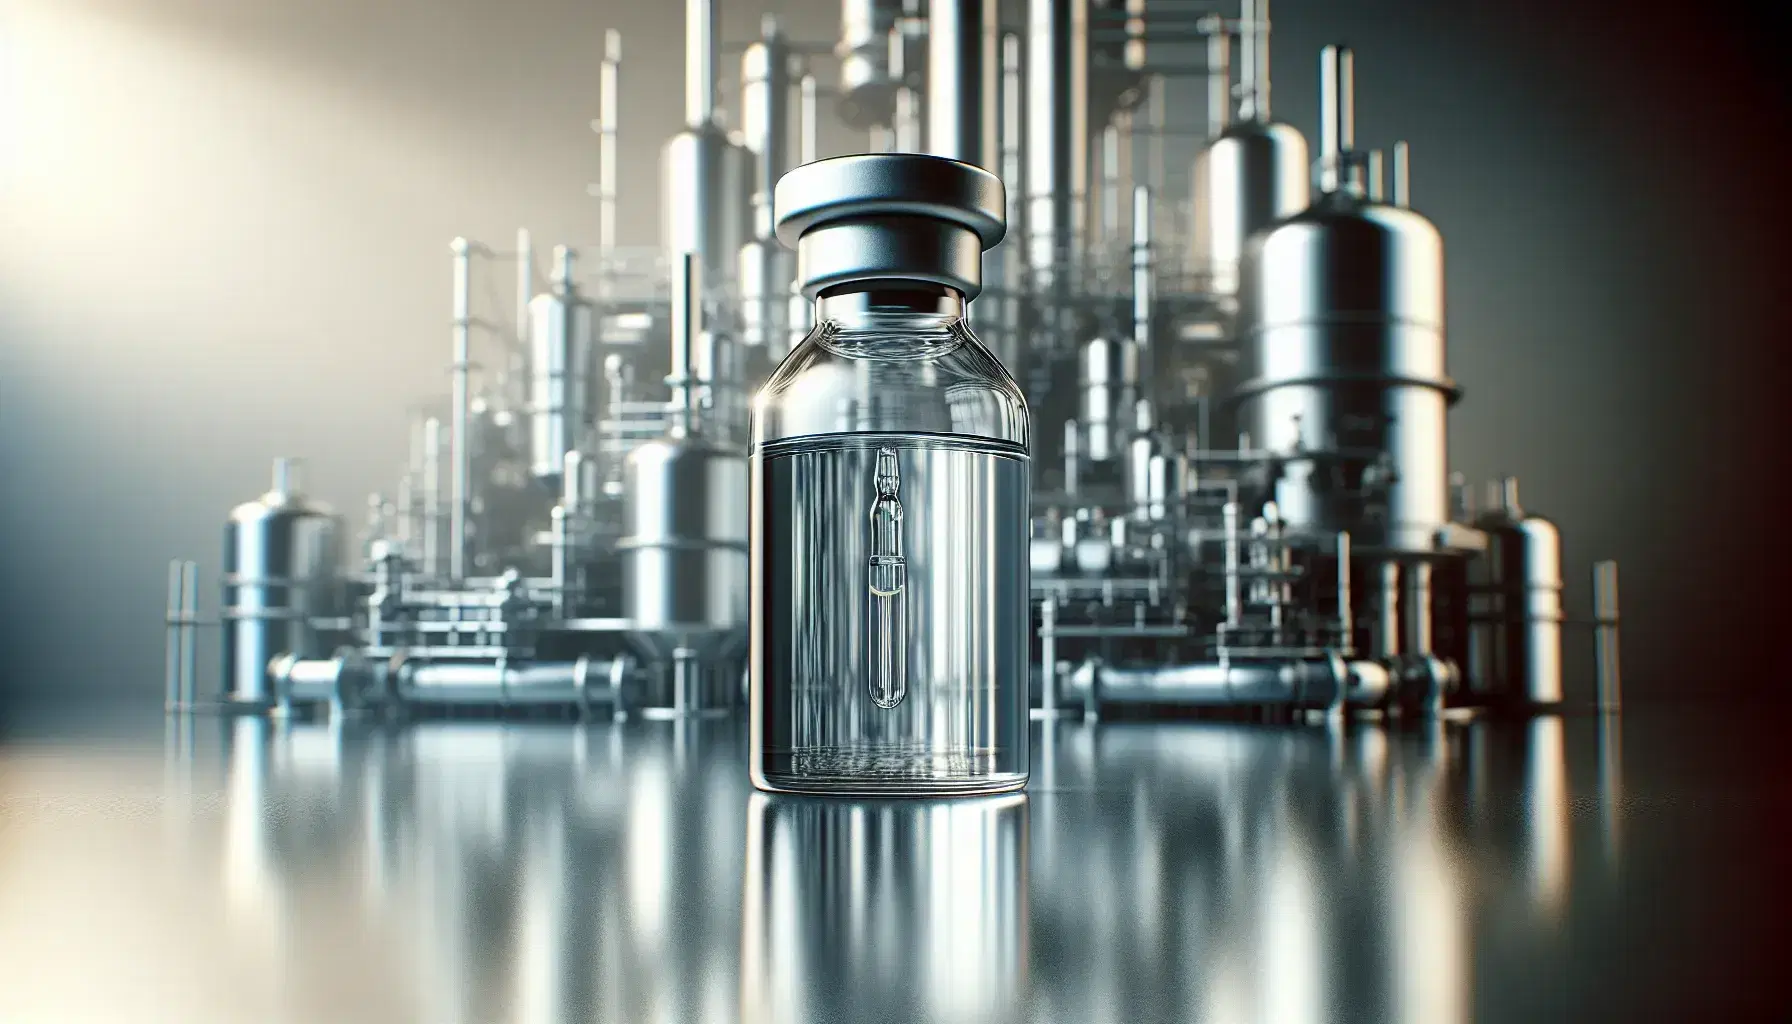 Transparent glass vial with colorless liquid on reflective metal surface, with blurred industrial plant background.